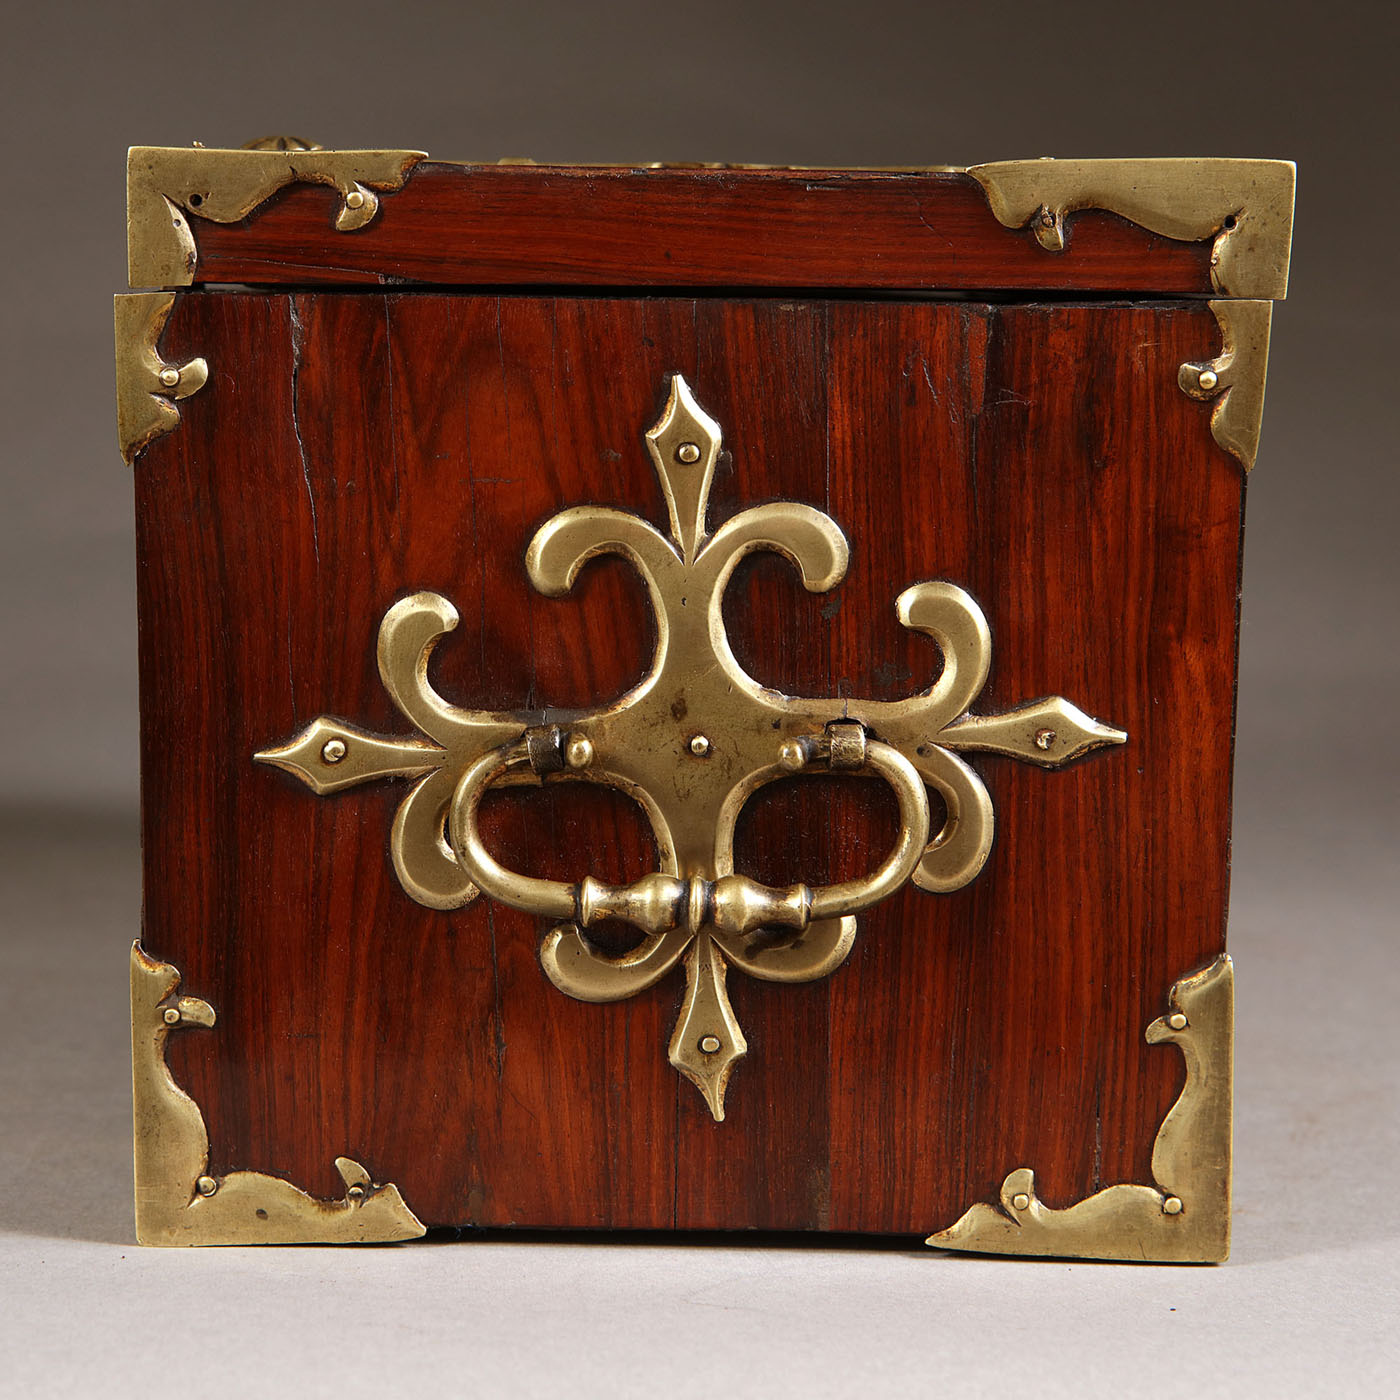 17th Century William and Mary Kingwood Strongbox, with Gilt Brass